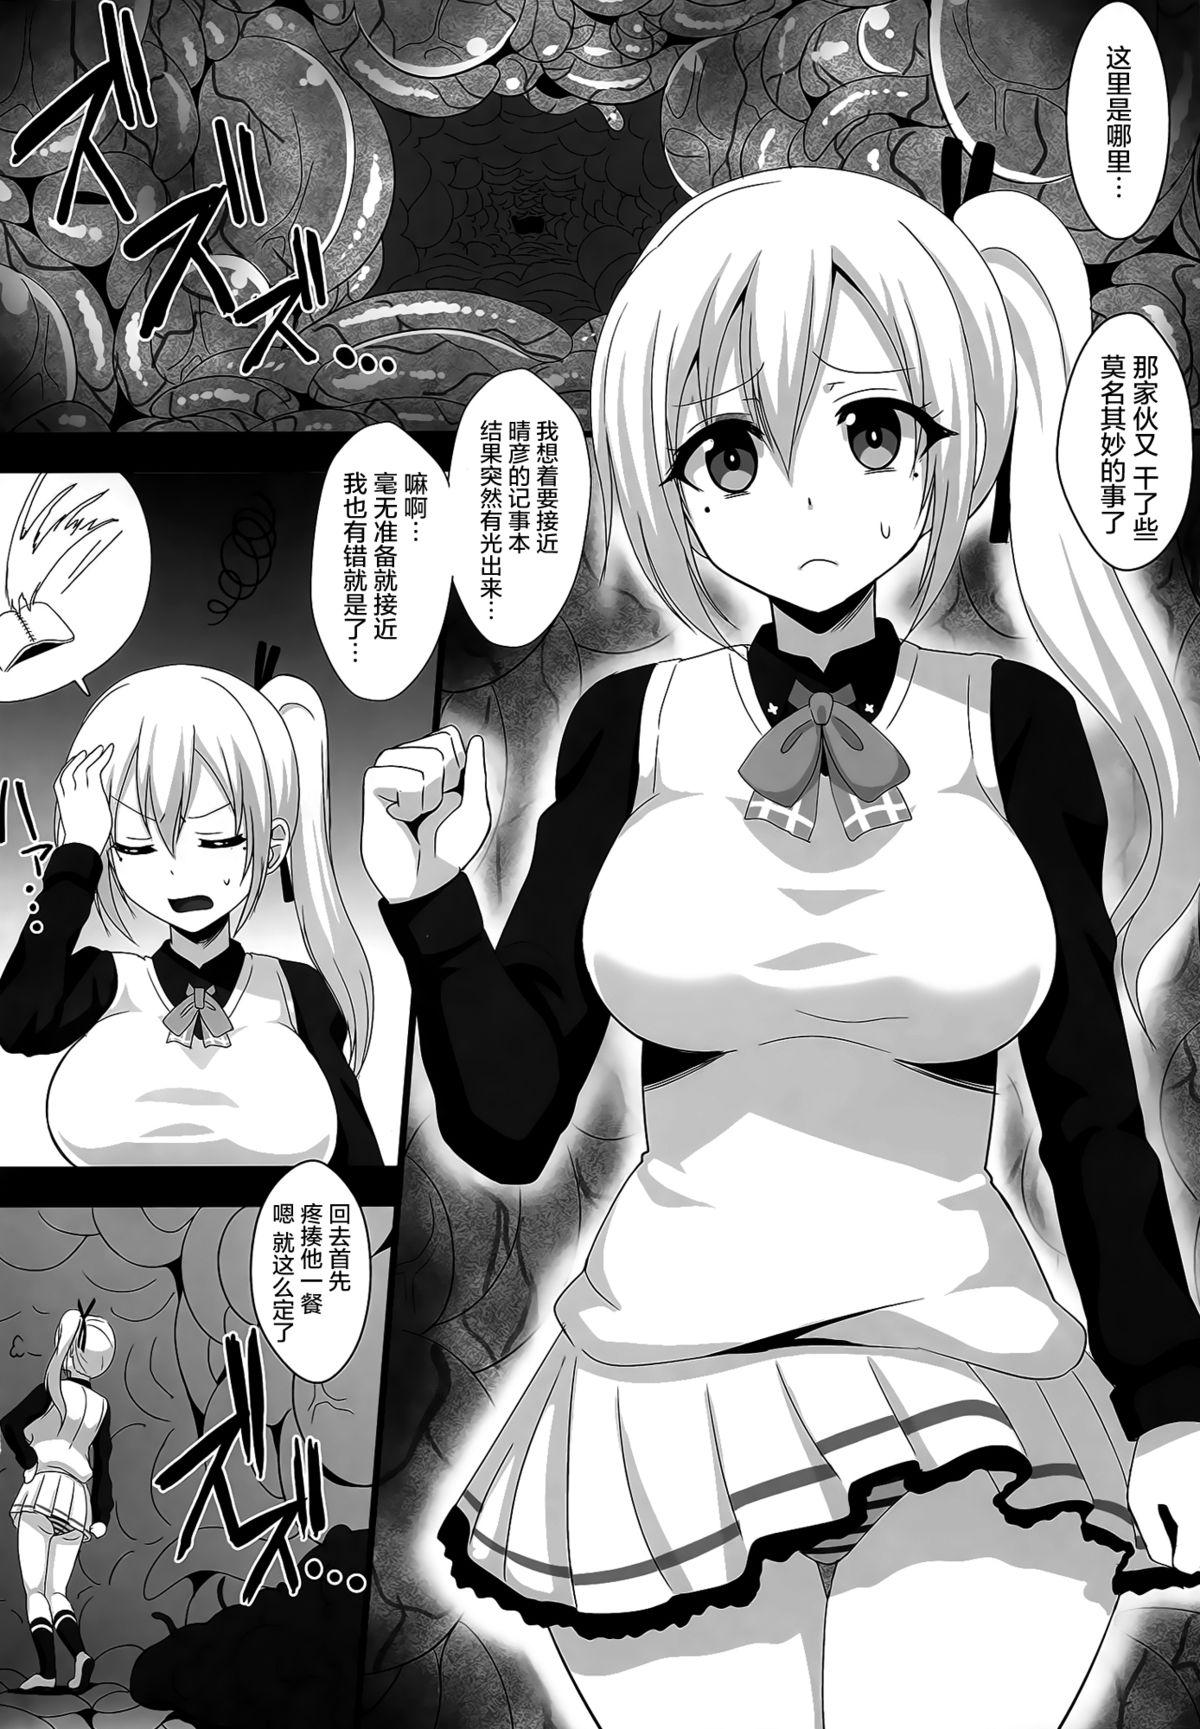 Rope Mugen Zecchou no Tentacle World - Myriad colors phantom world Two - Page 5